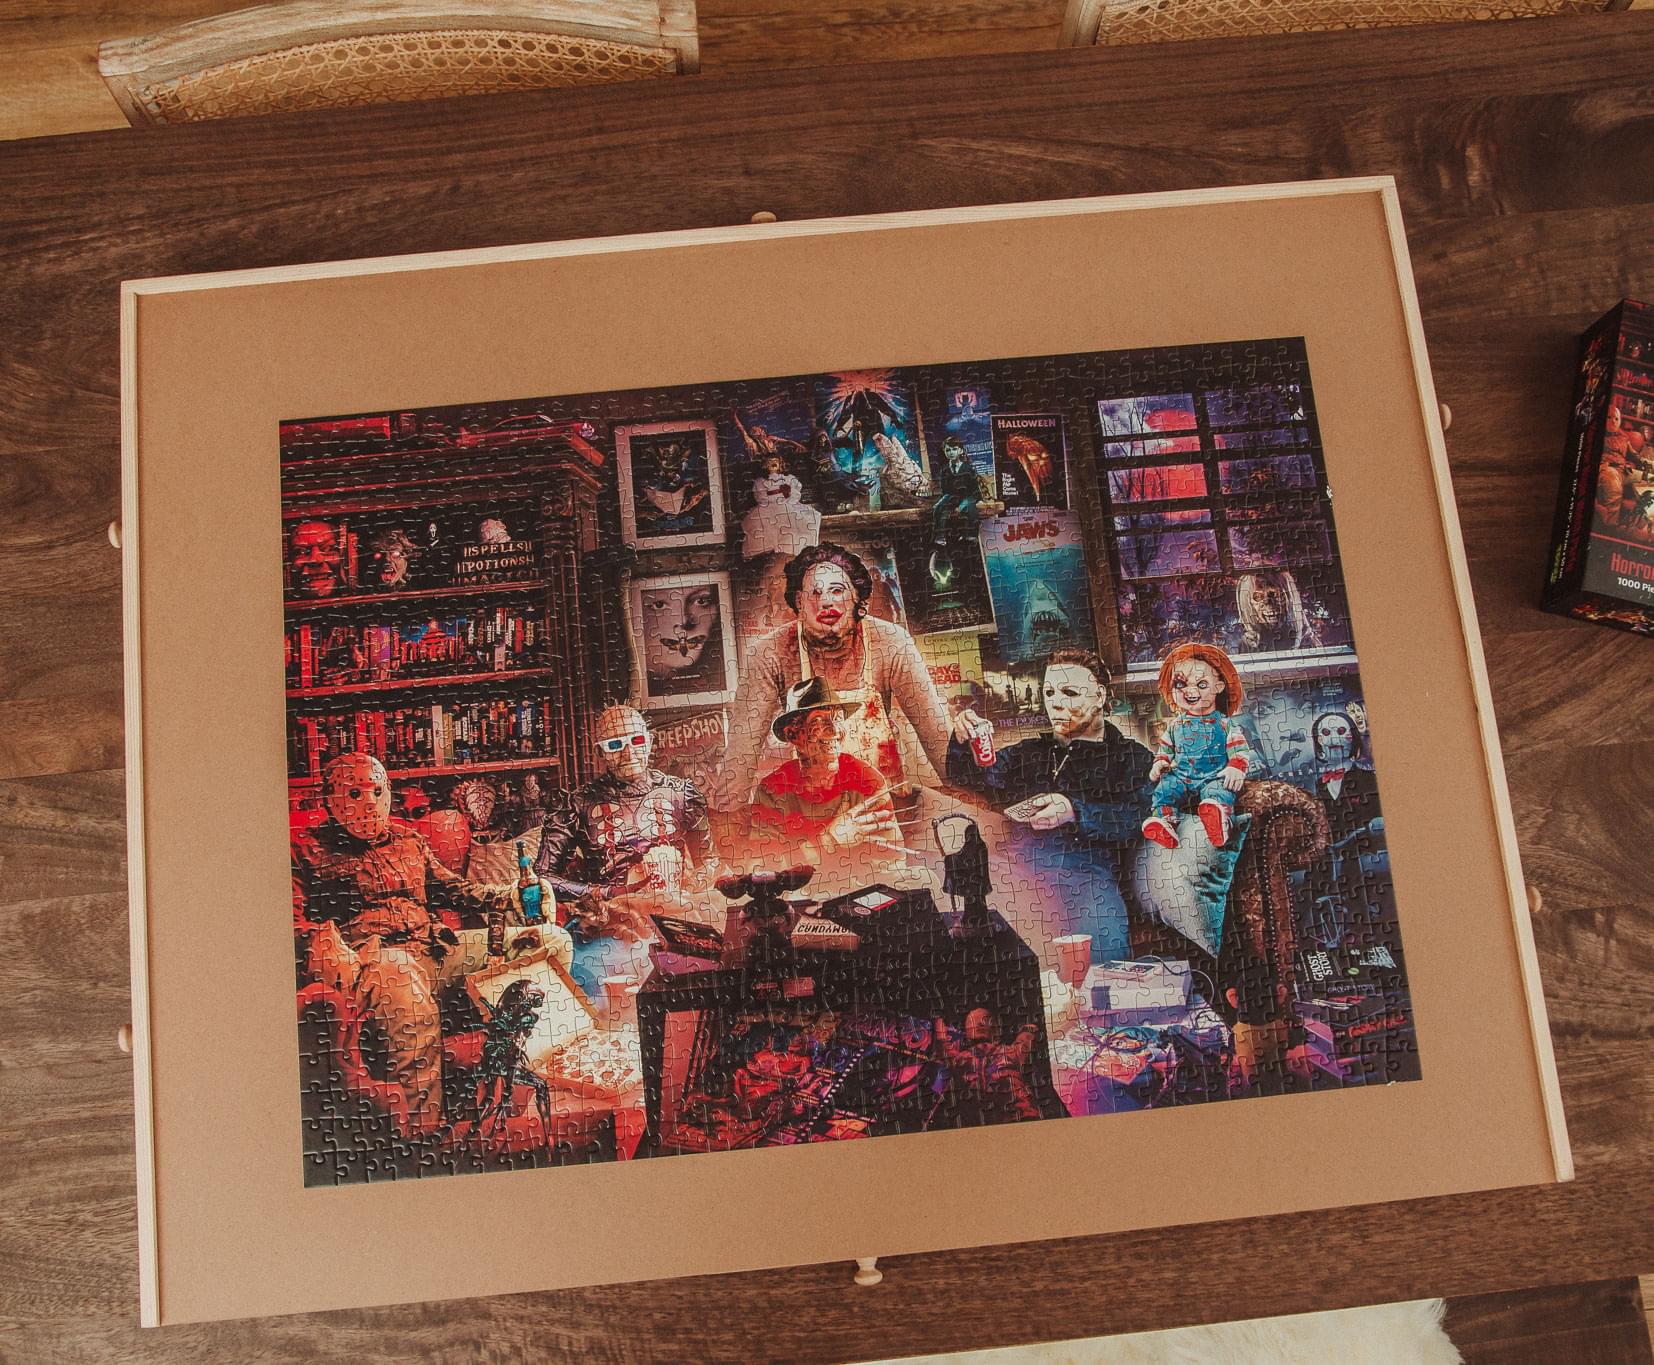 Horror Night Watch Party 1000 Piece Jigsaw Puzzle By Rachid Lotf